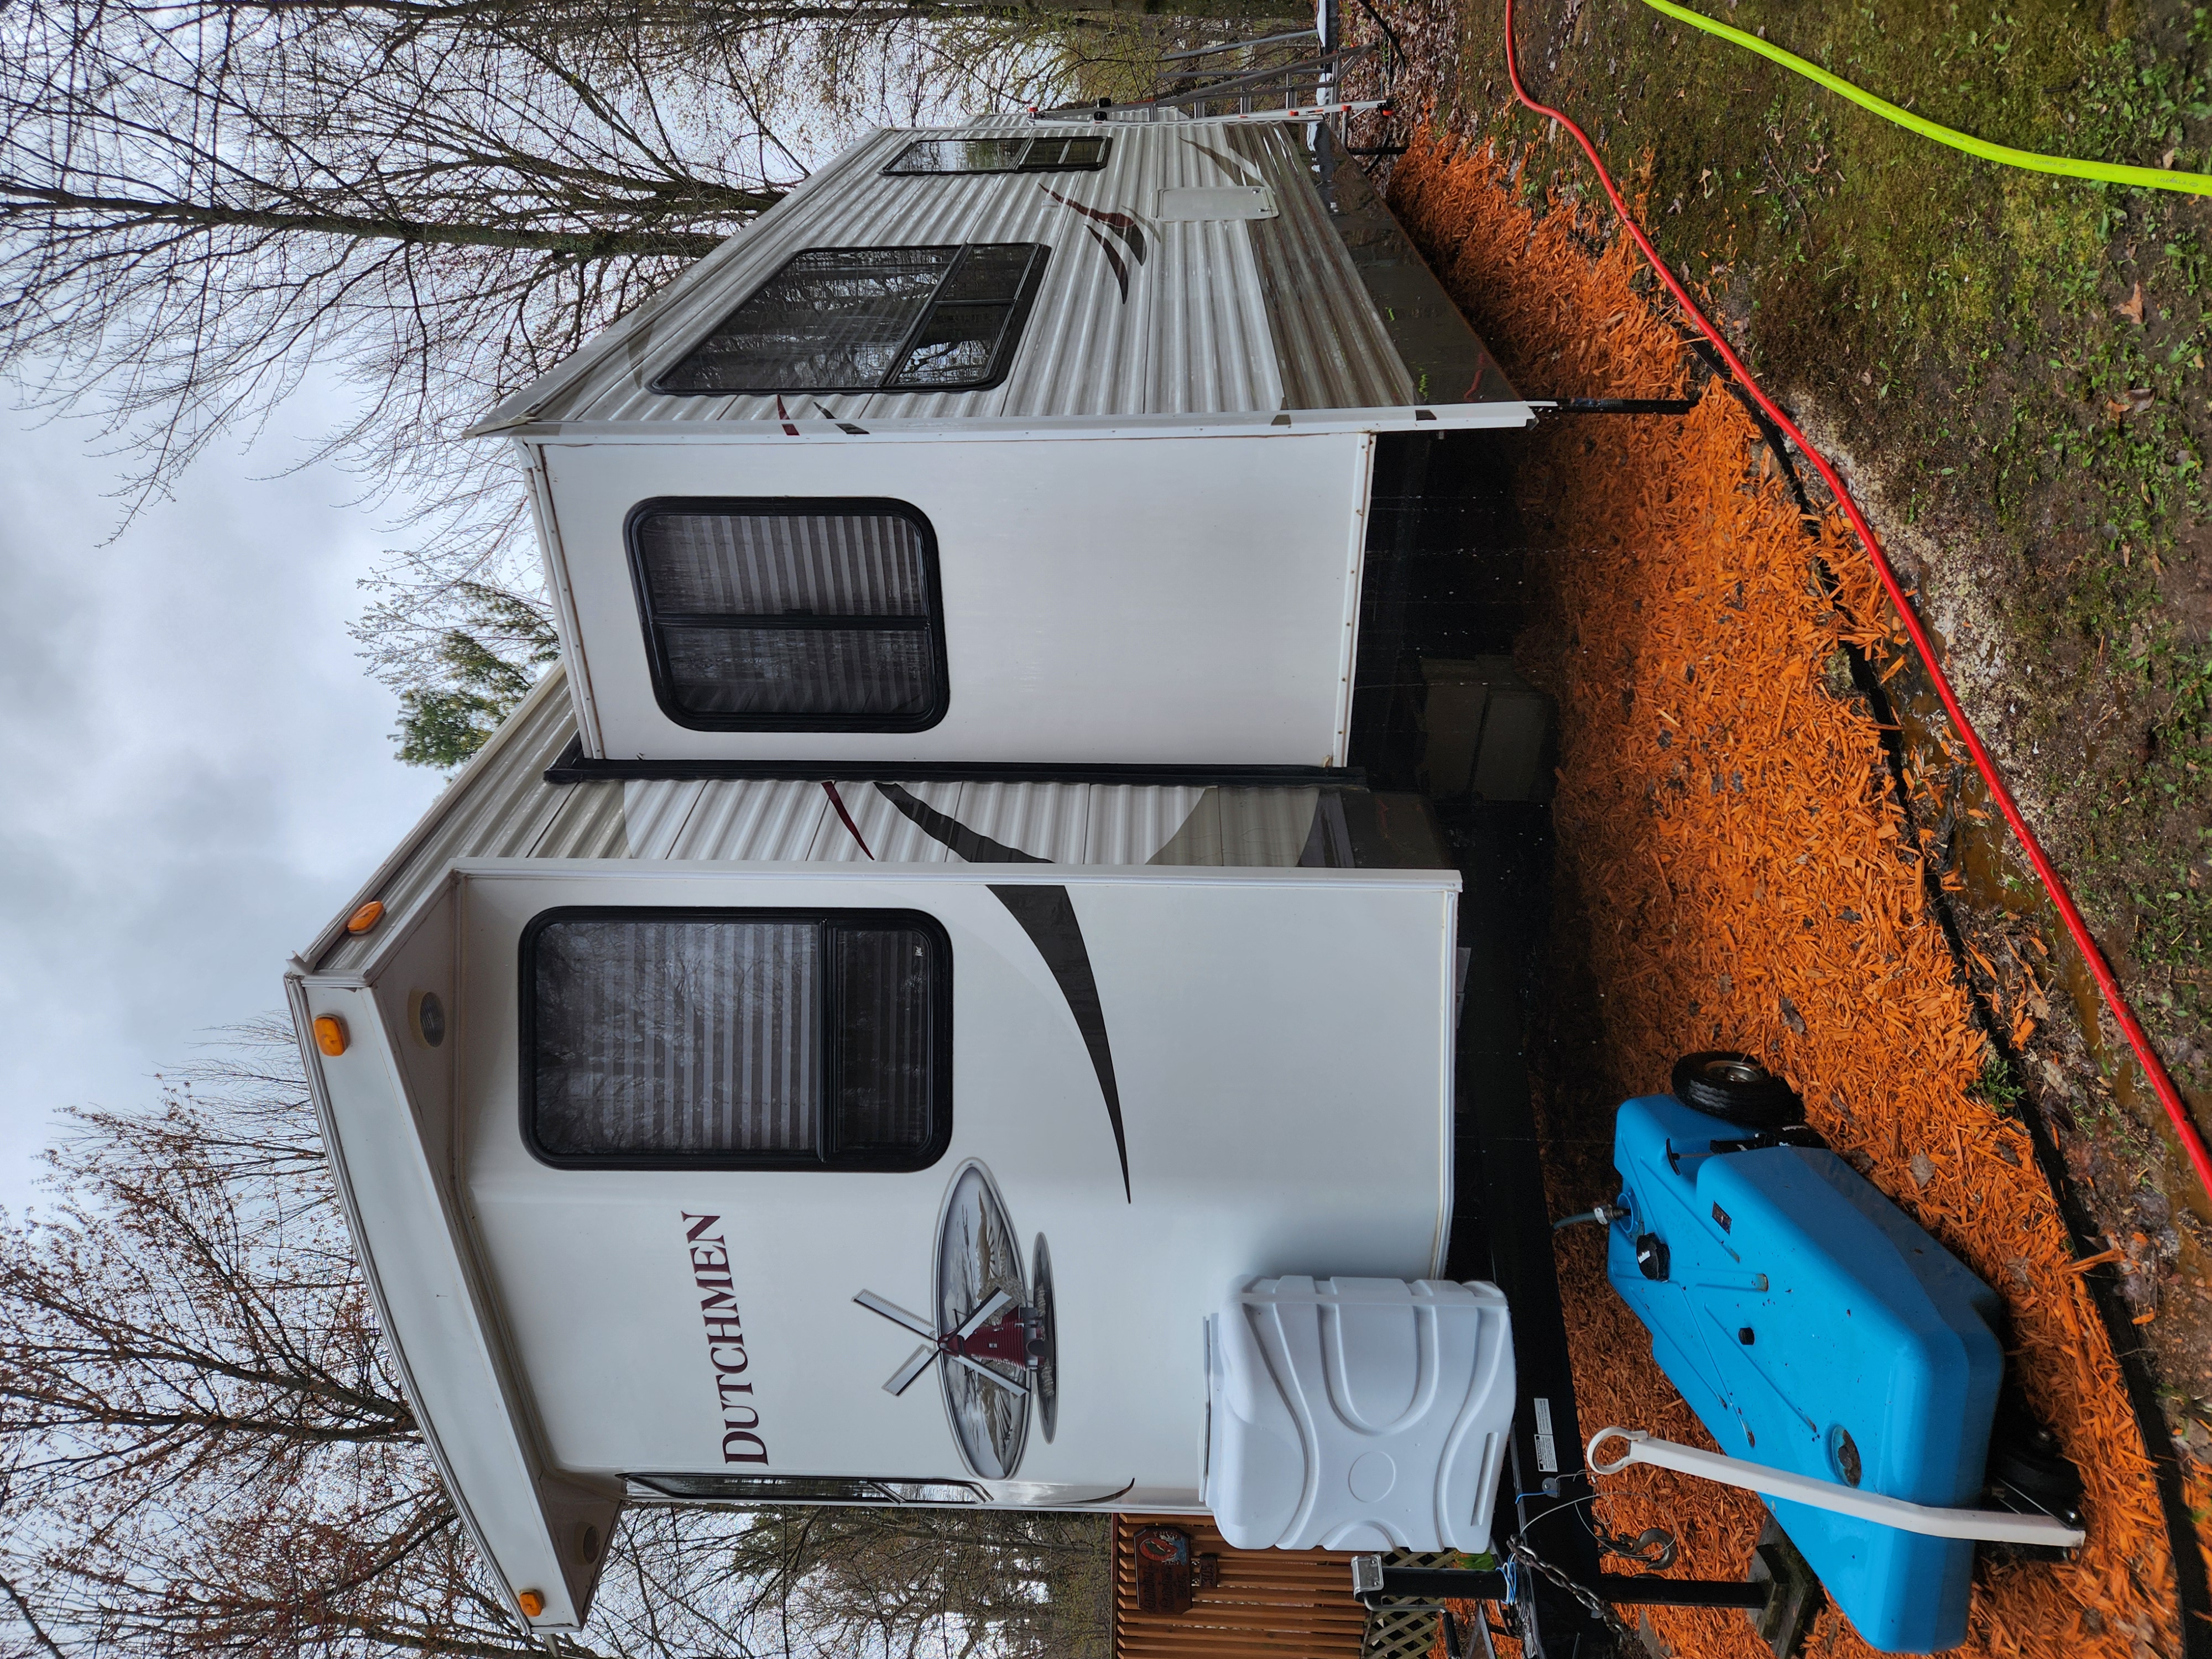 Seasonal RV Cleaning, Patio Cleaning, and Camper Washing at ONeil Creek Campground in Chippewa Falls, WI